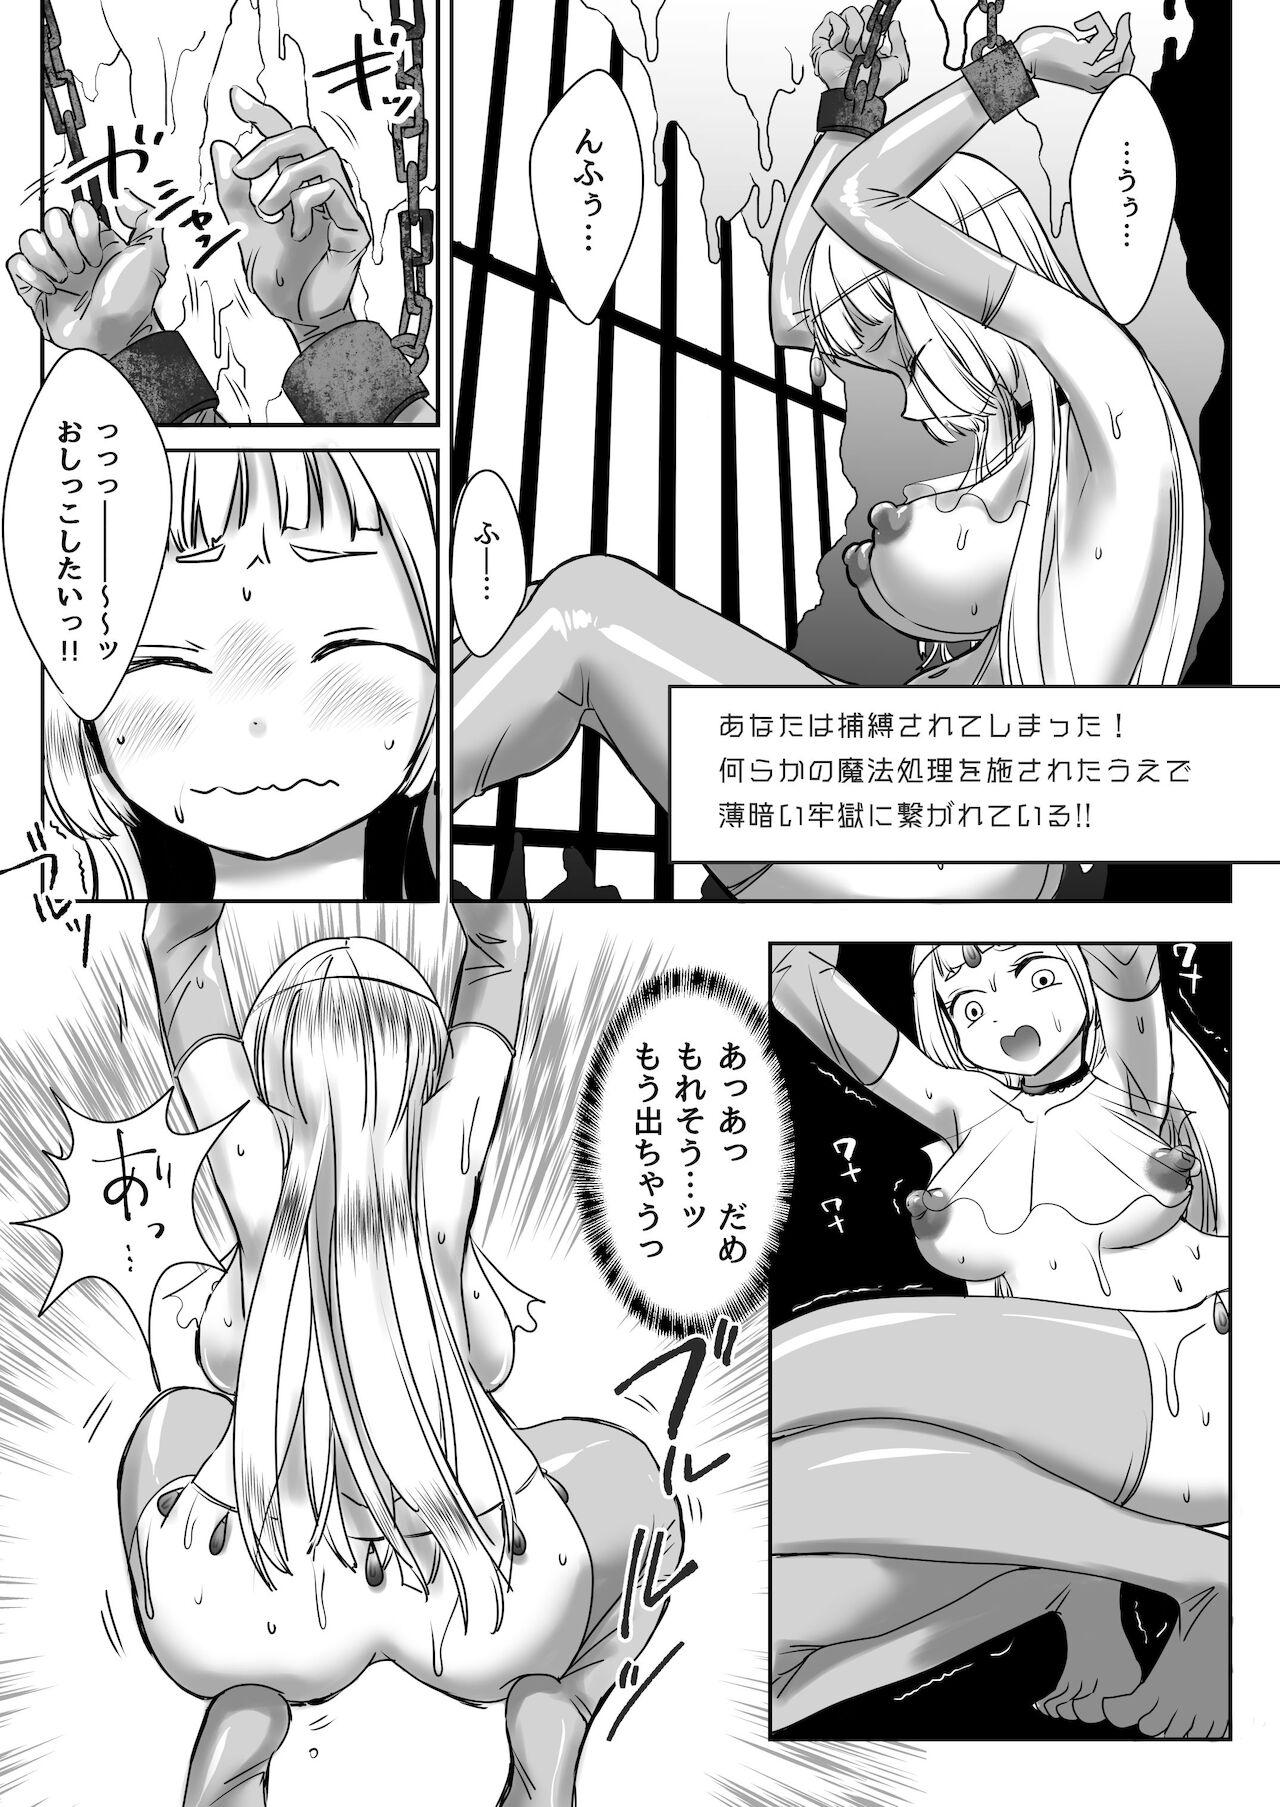 Outdoor C99 VR Doujin Eroge Reminiscence Room - Original Colombian - Page 10